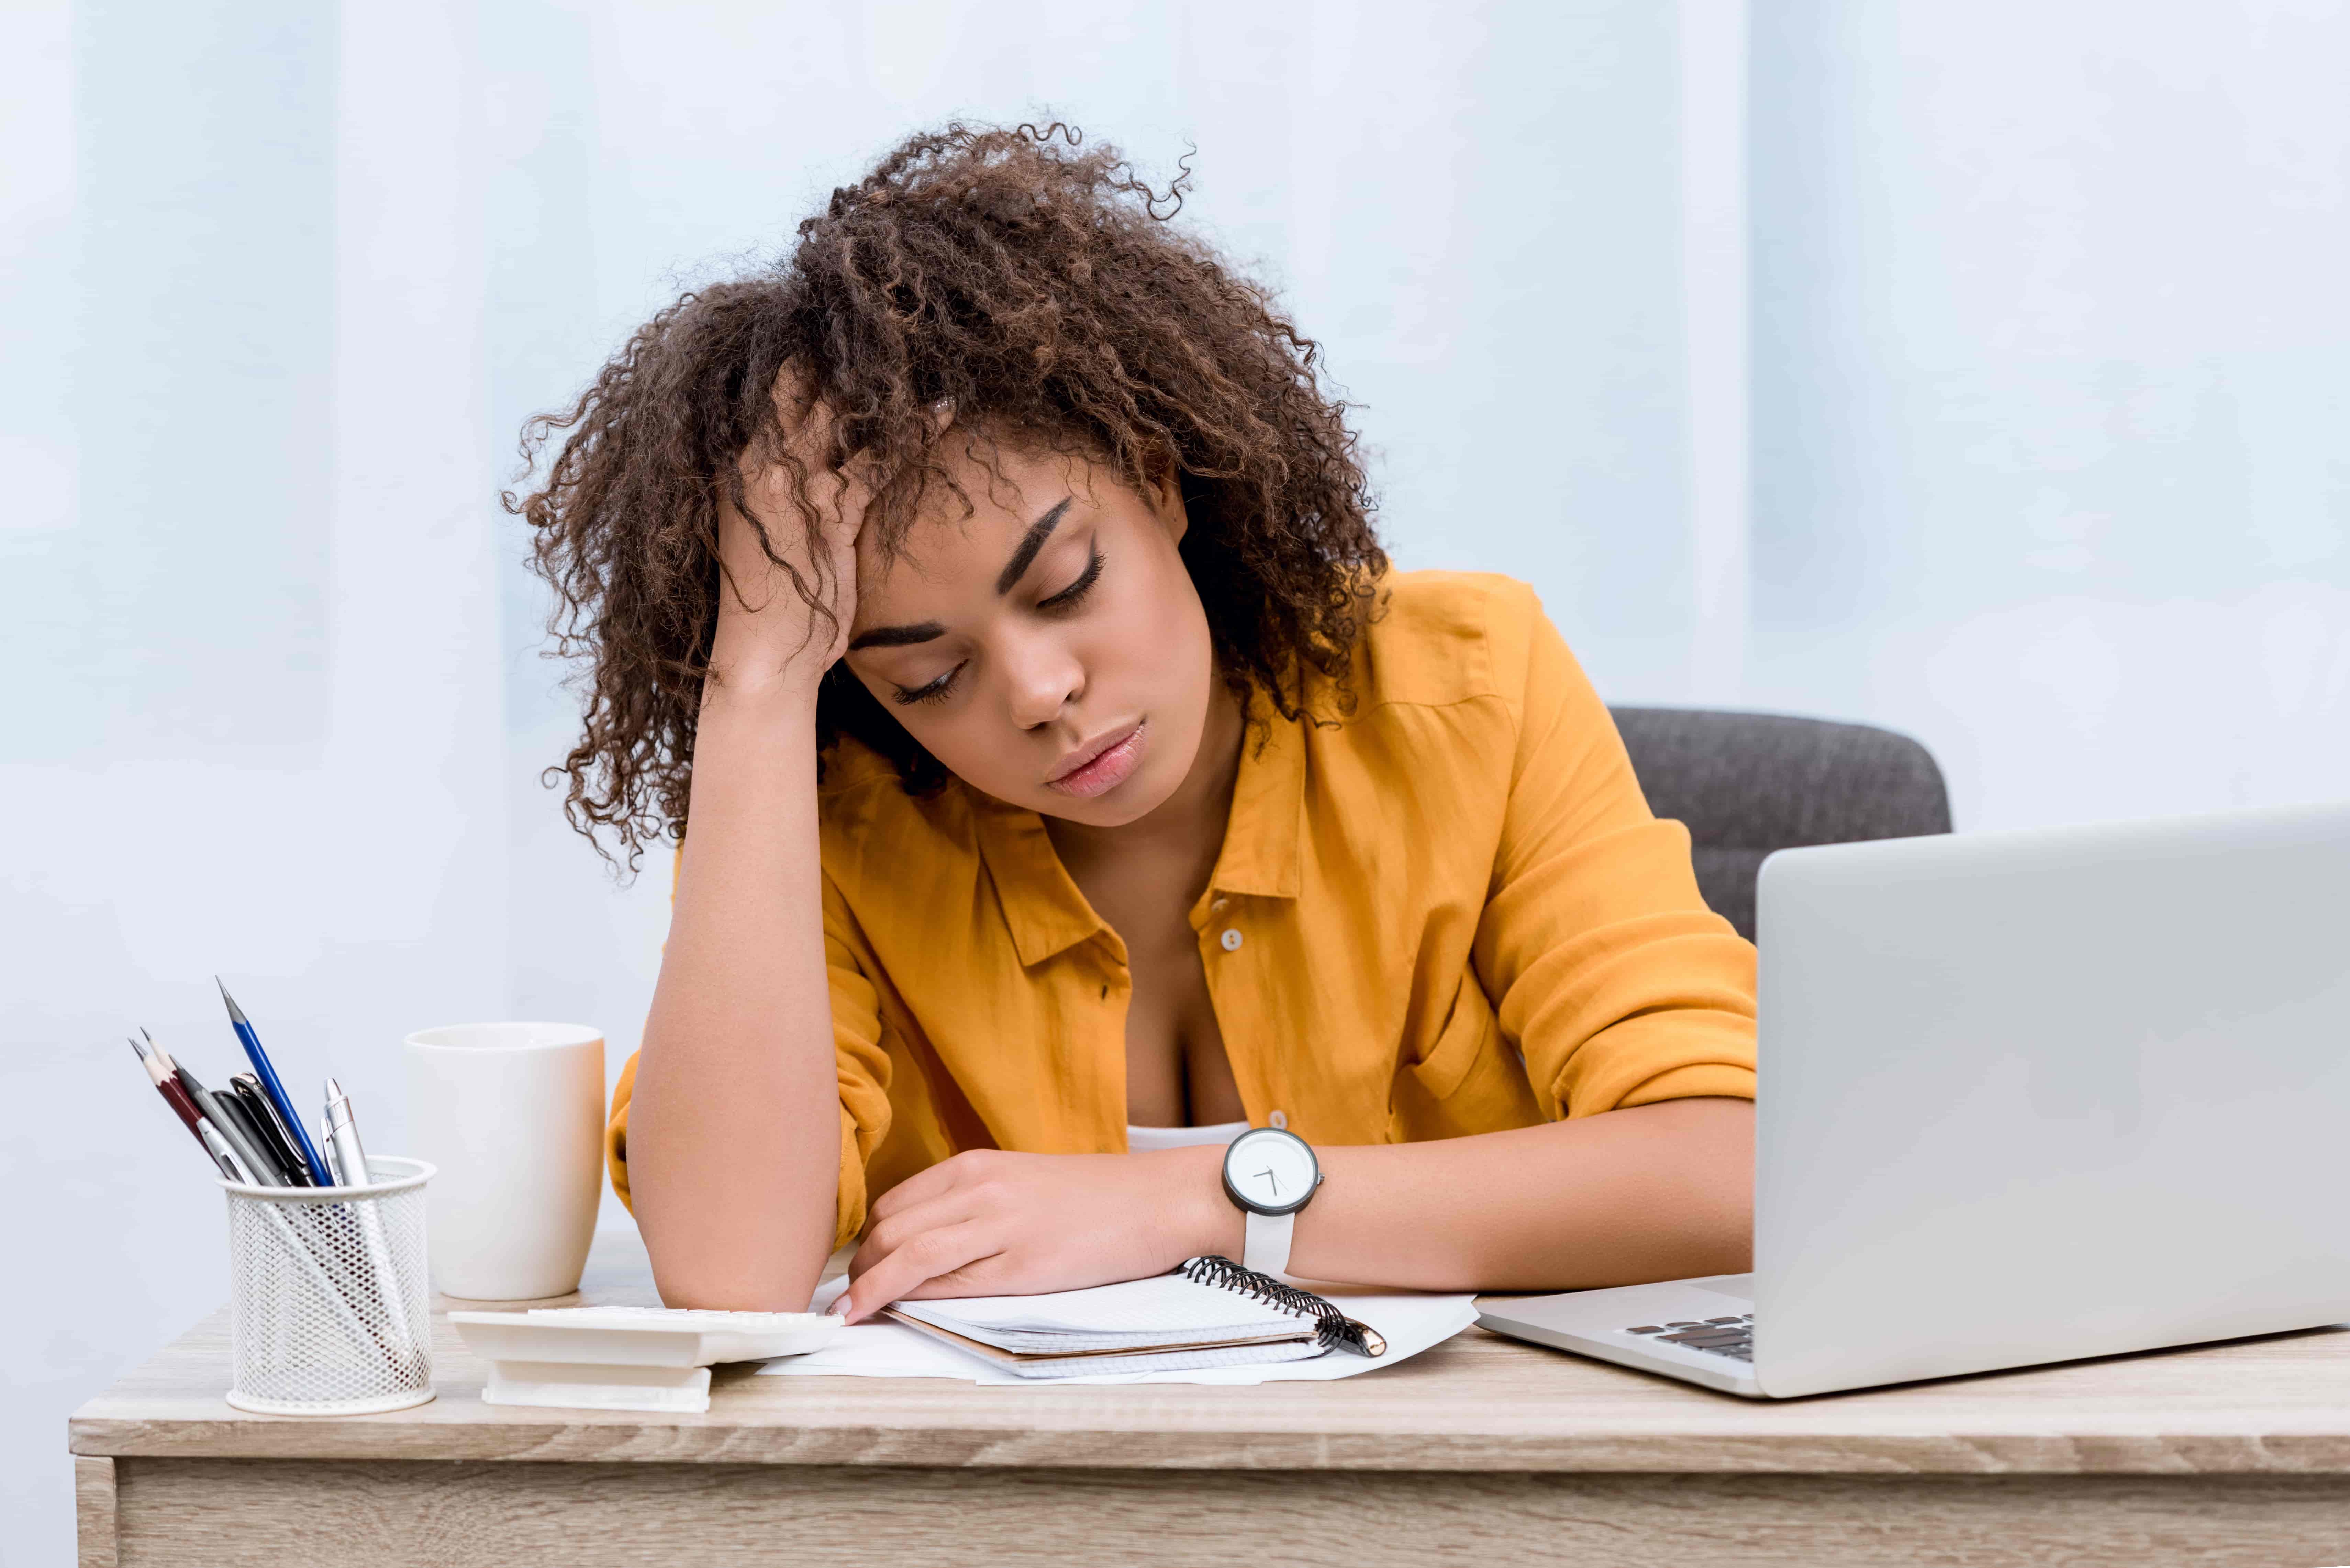 sleep deprived young woman sitting at workplace in office